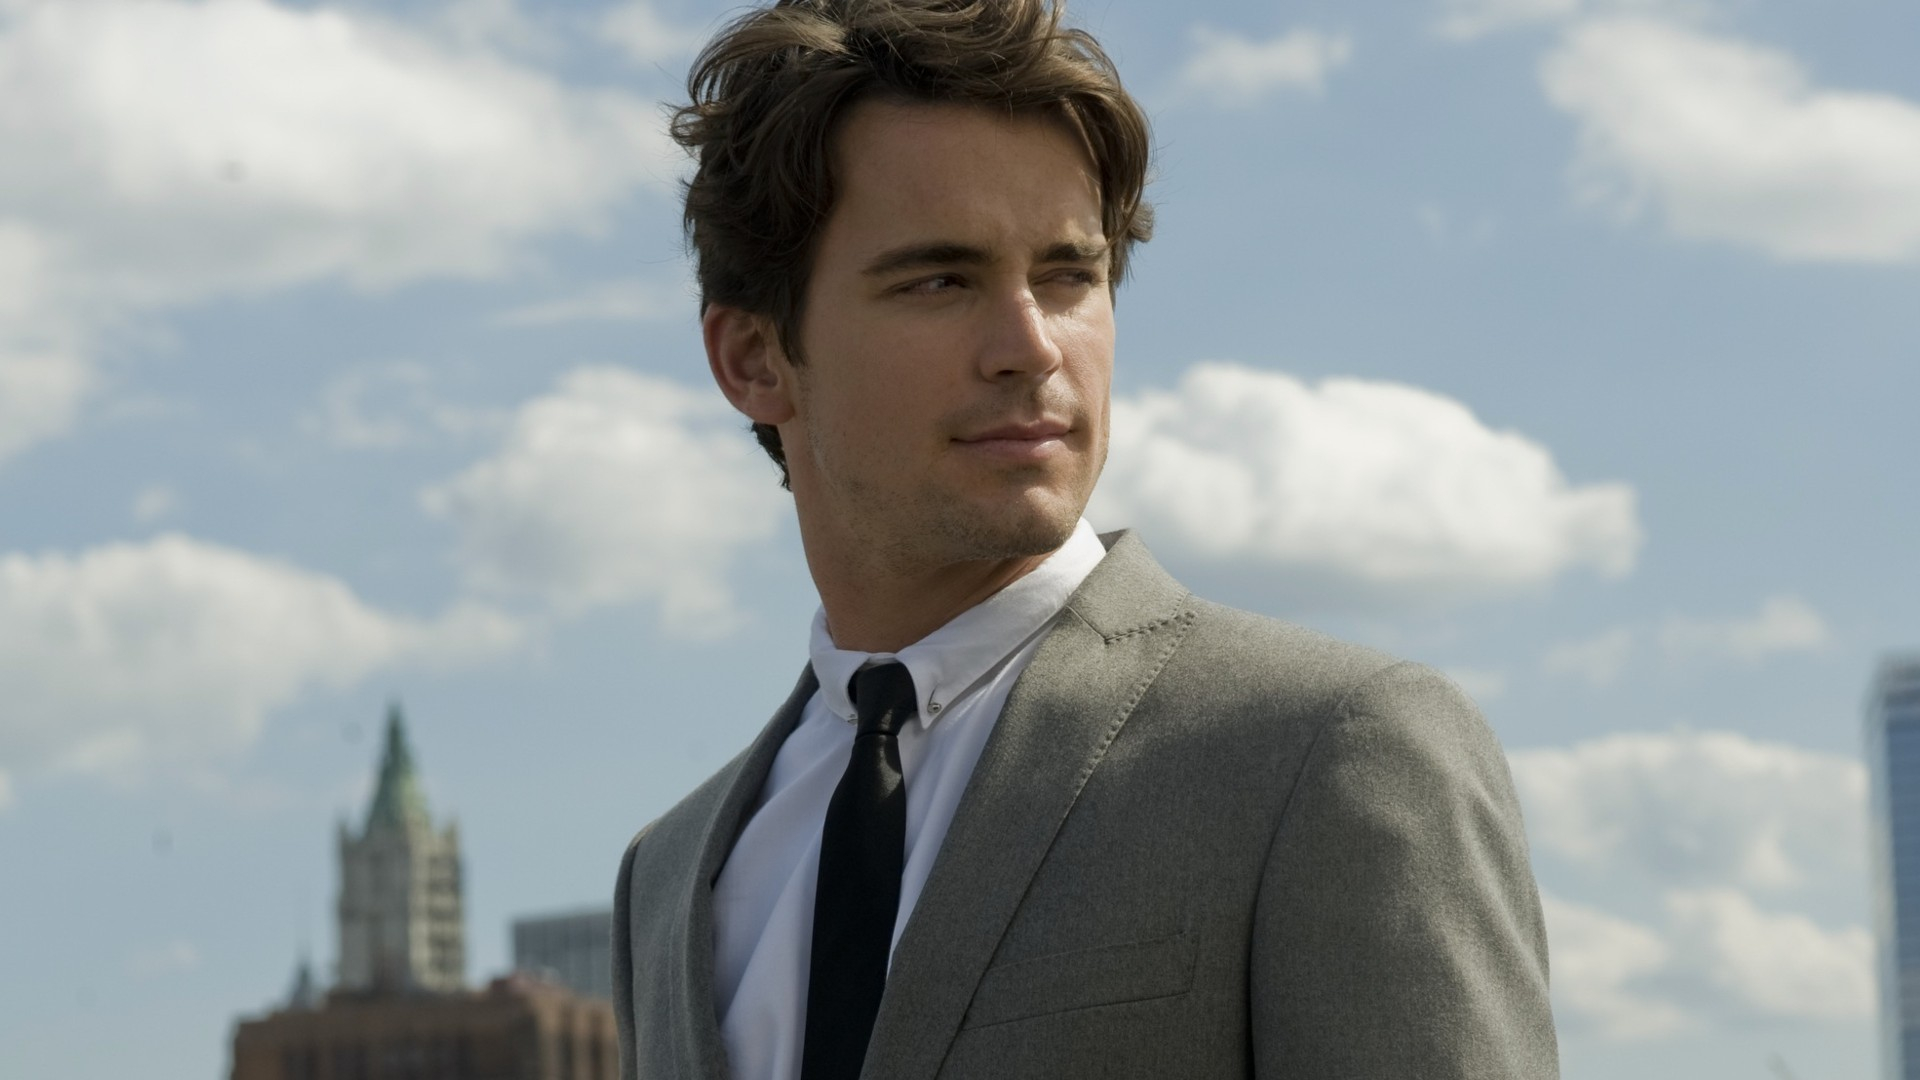 1920x1080 10+ White Collar HD Wallpapers and Backgrounds